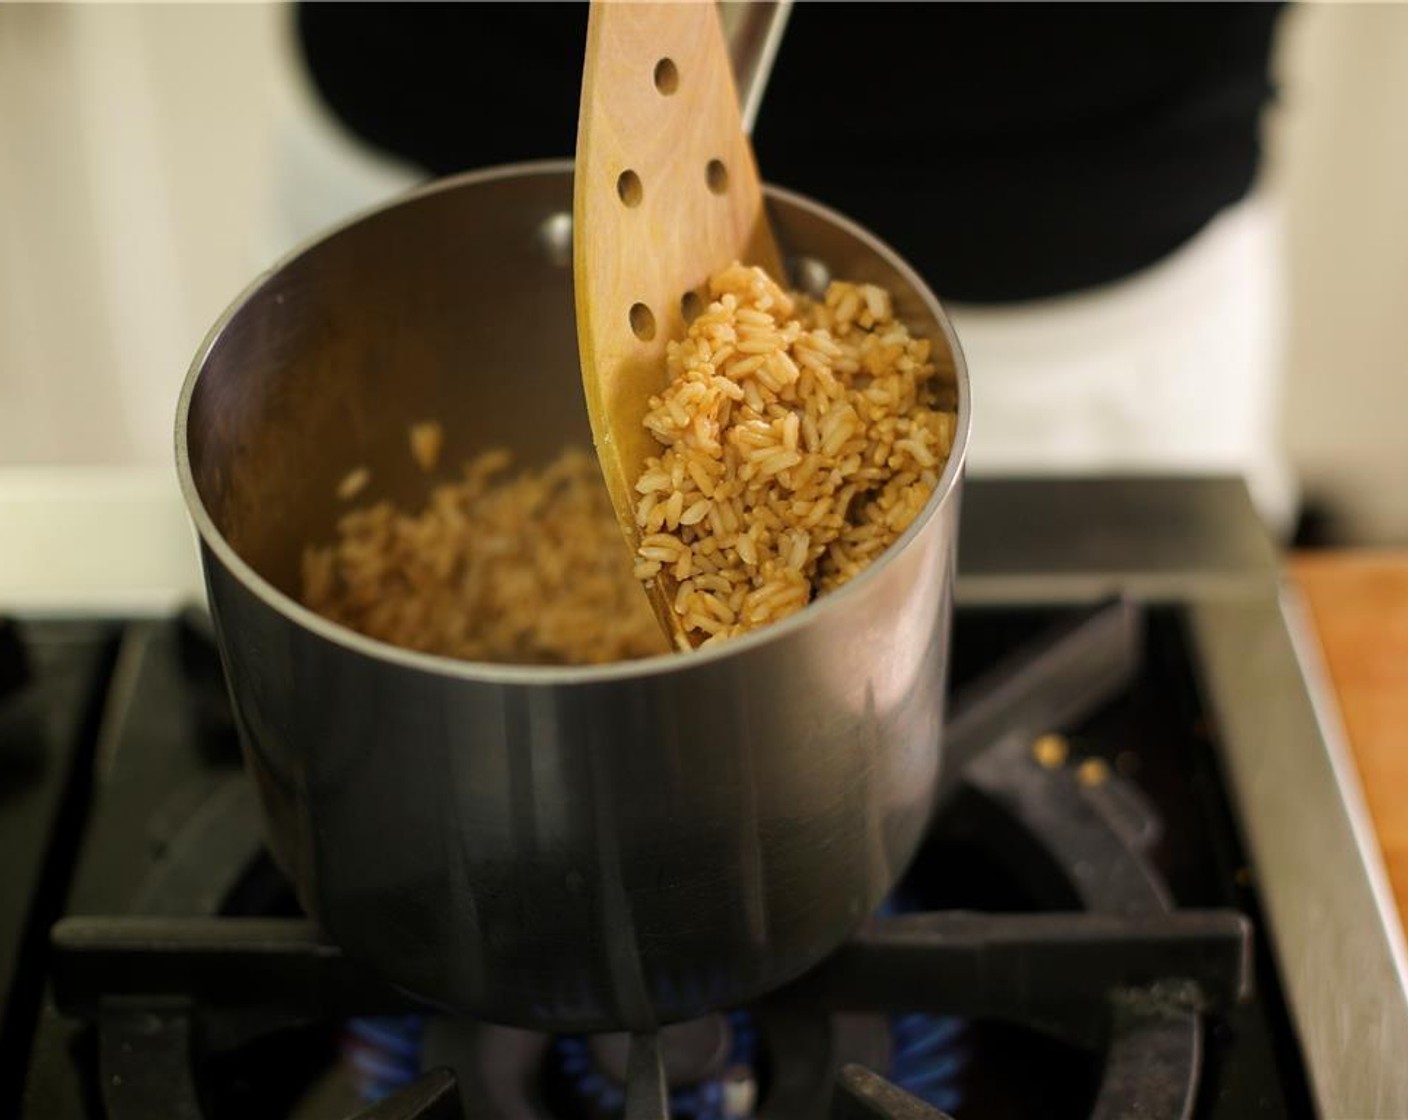 step 6 Into a small saucepan, pour the Mahatma® 100% Whole Grain Brown Rice (2/3 cup) one cup of water and the Vegetable Base (1 pckg). Stir. Bring to a boil over medium high heat. When water begins to boil, stir once, cover, and reduce heat to low. Simmer for 23 minutes.